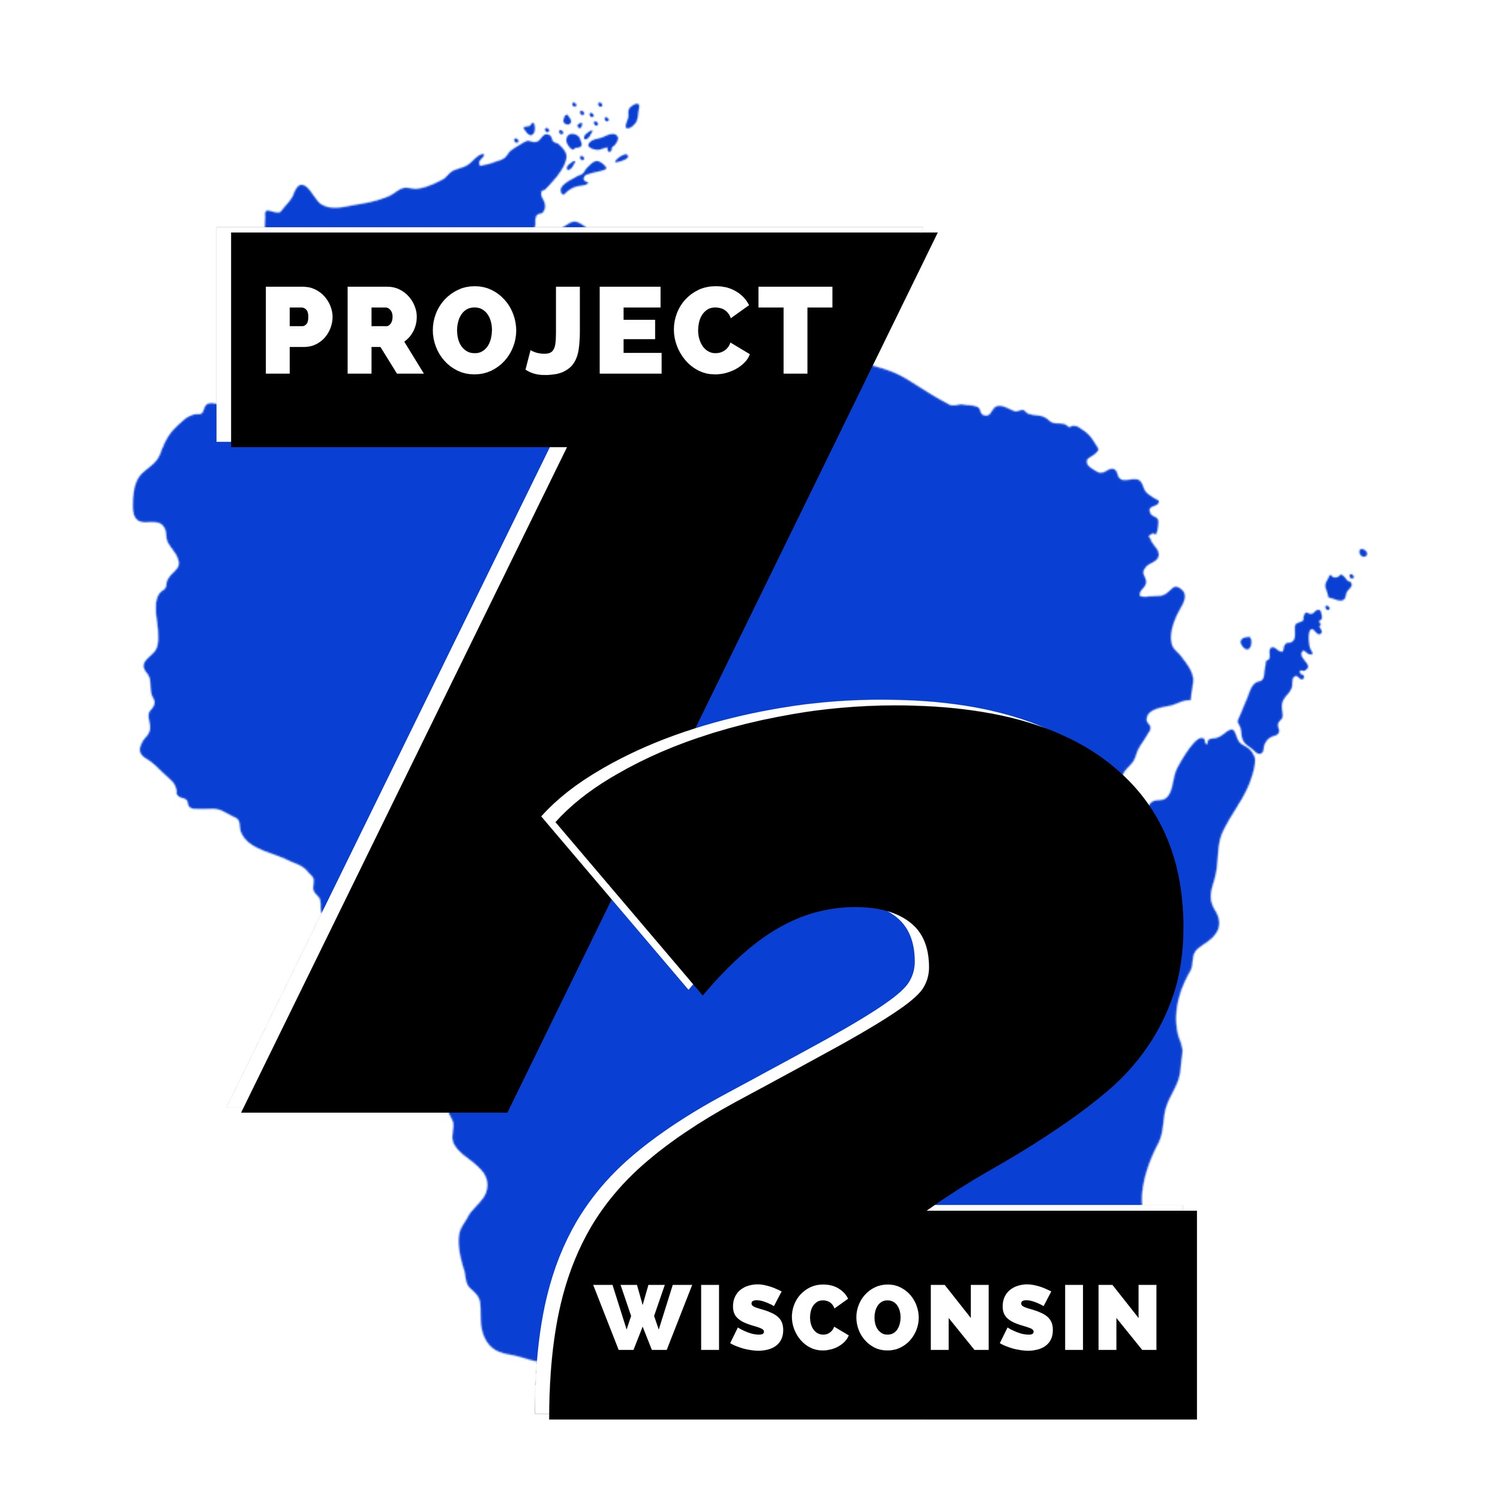 Project 72 Wisconsin PAC